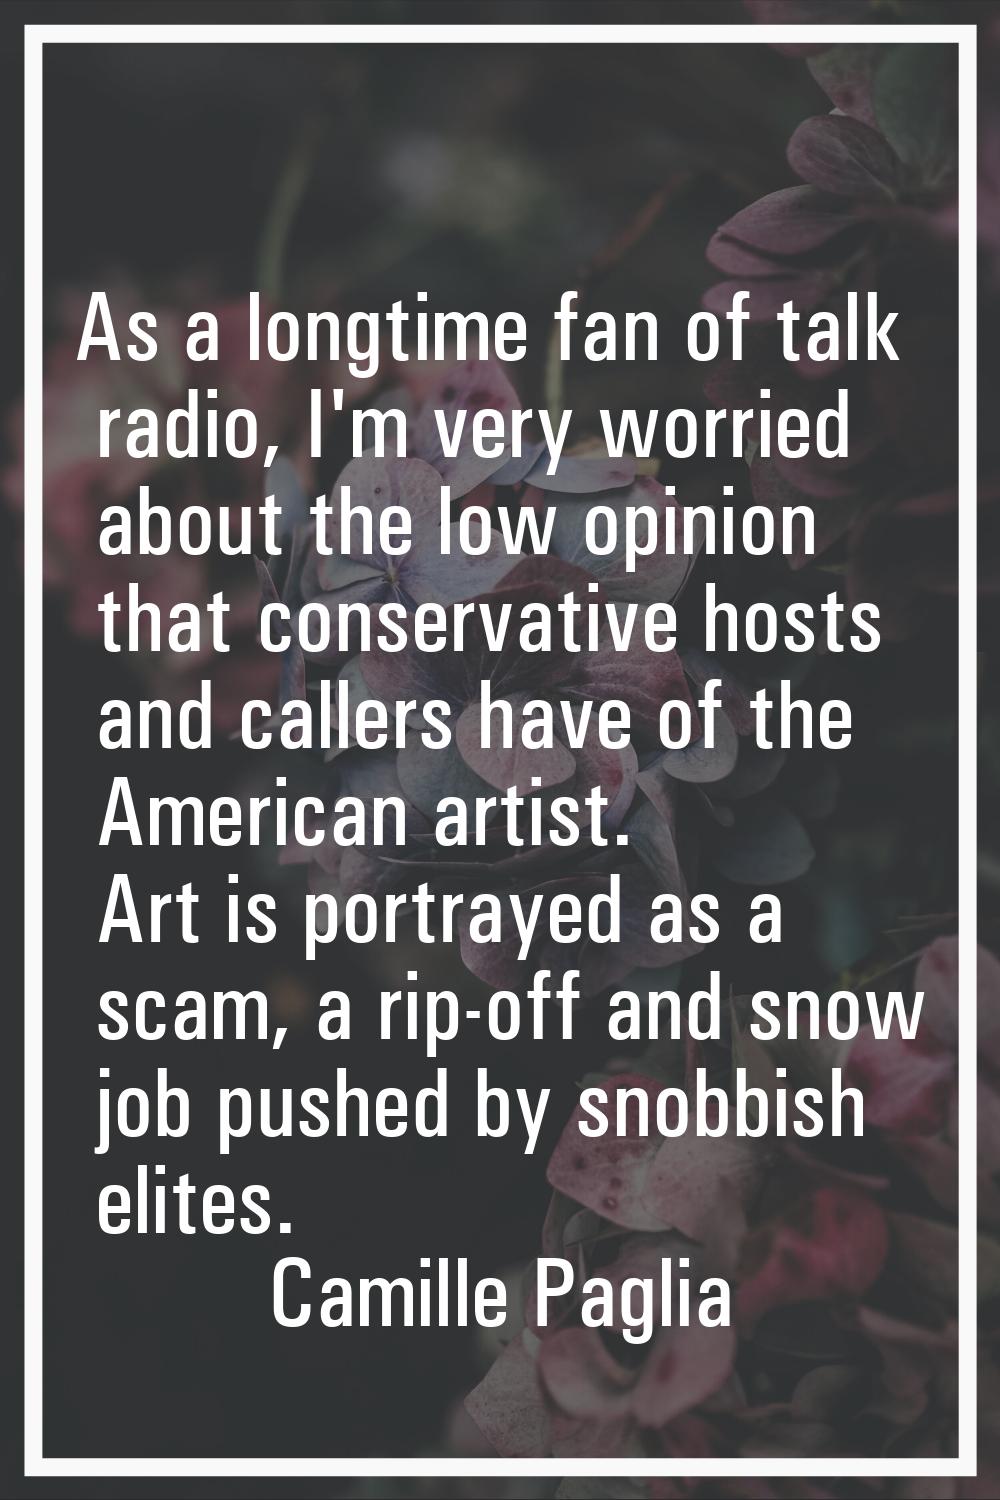 As a longtime fan of talk radio, I'm very worried about the low opinion that conservative hosts and